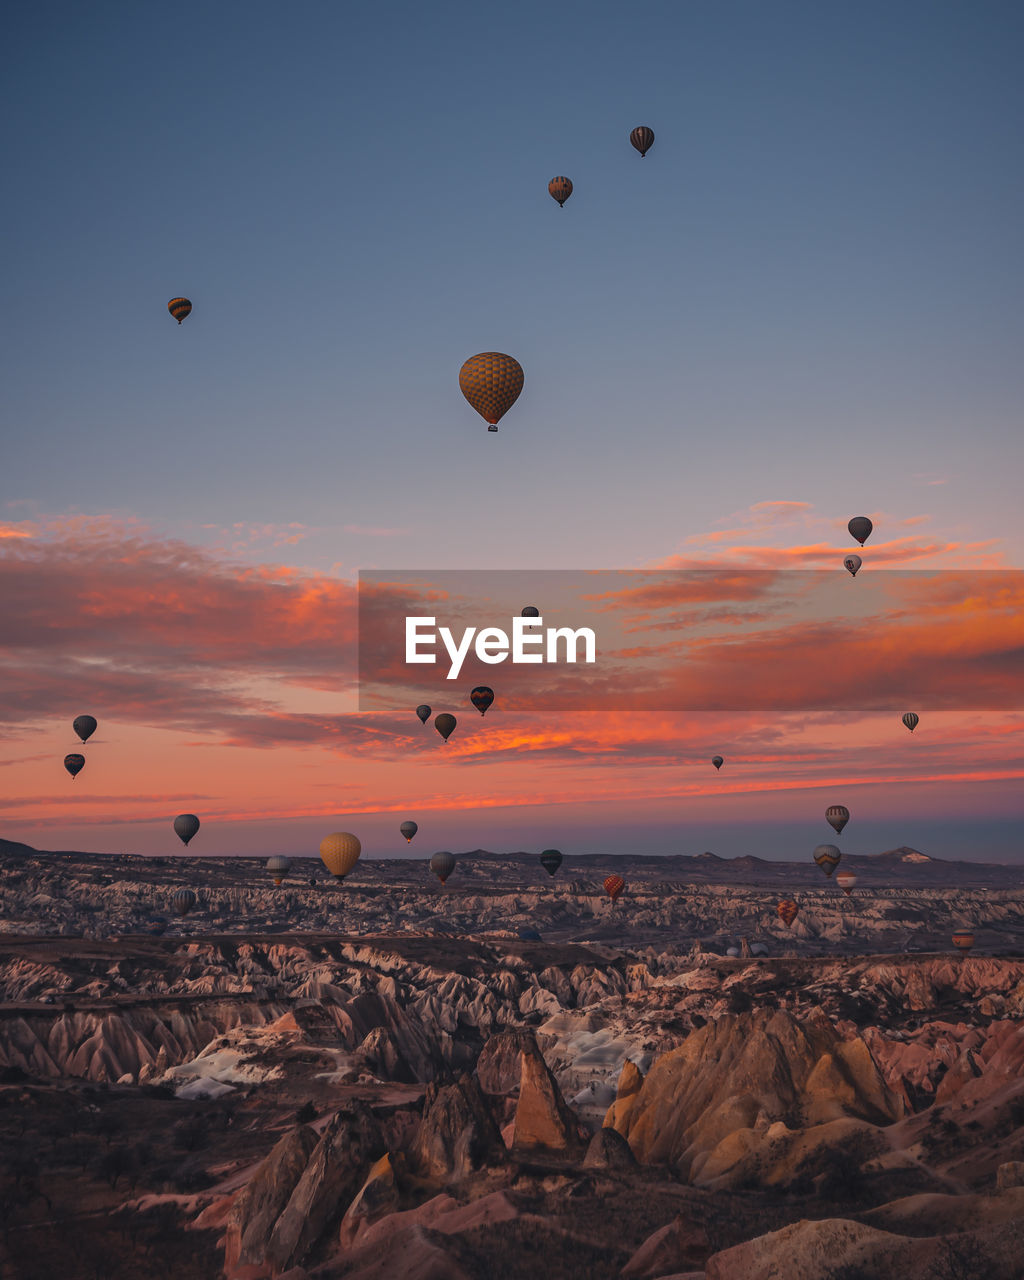 VIEW OF HOT AIR BALLOONS FLYING IN SKY AT SUNSET